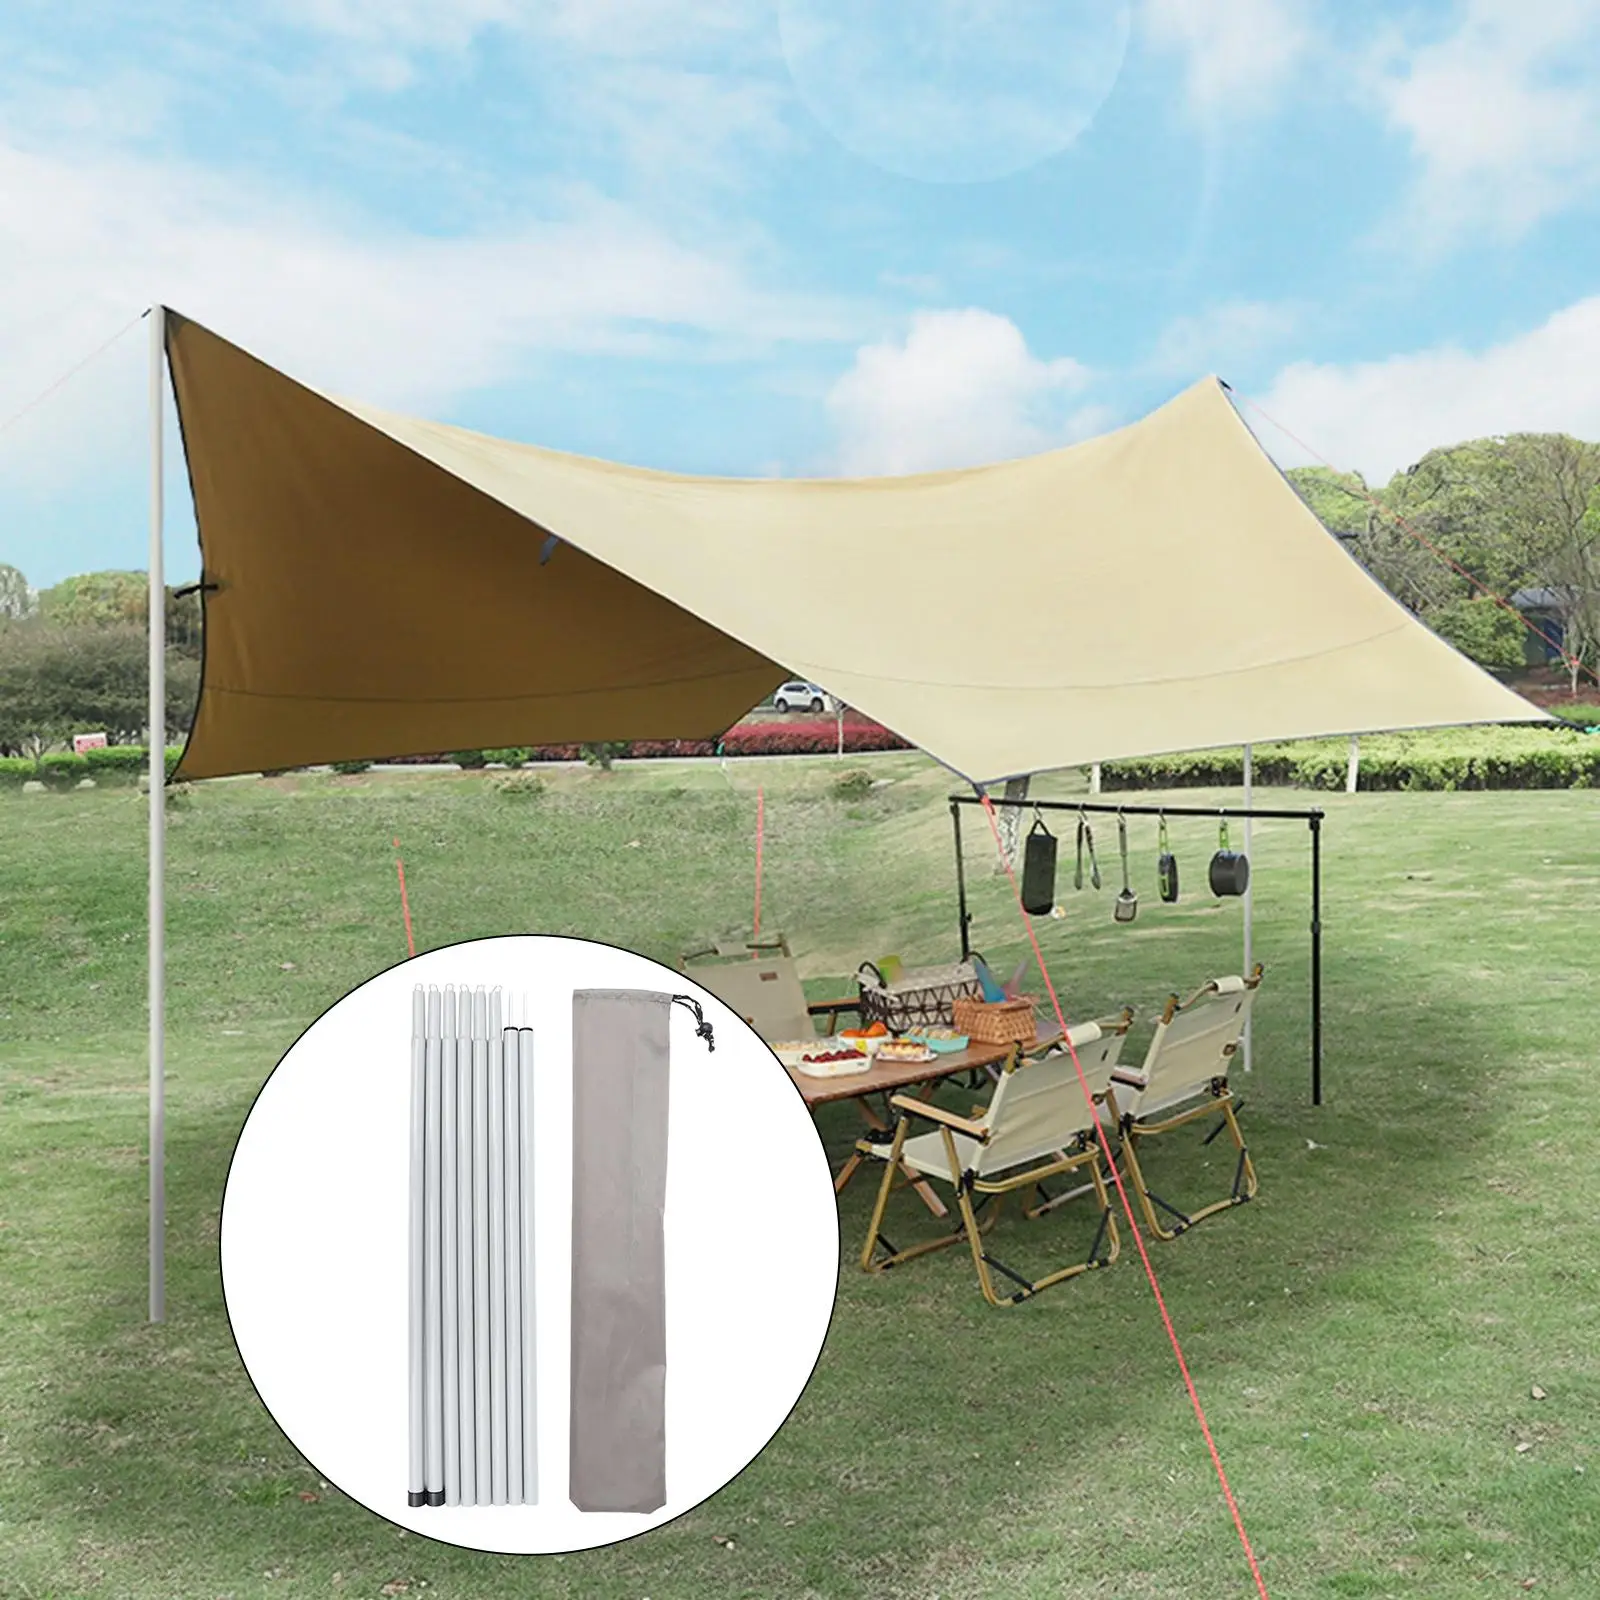 Tent Rods Outdoor Camping Tent Equipment Canopy Tarp Poles Canopy Support Rods Iron Canopy Awning Frame Camping Tent Accessories